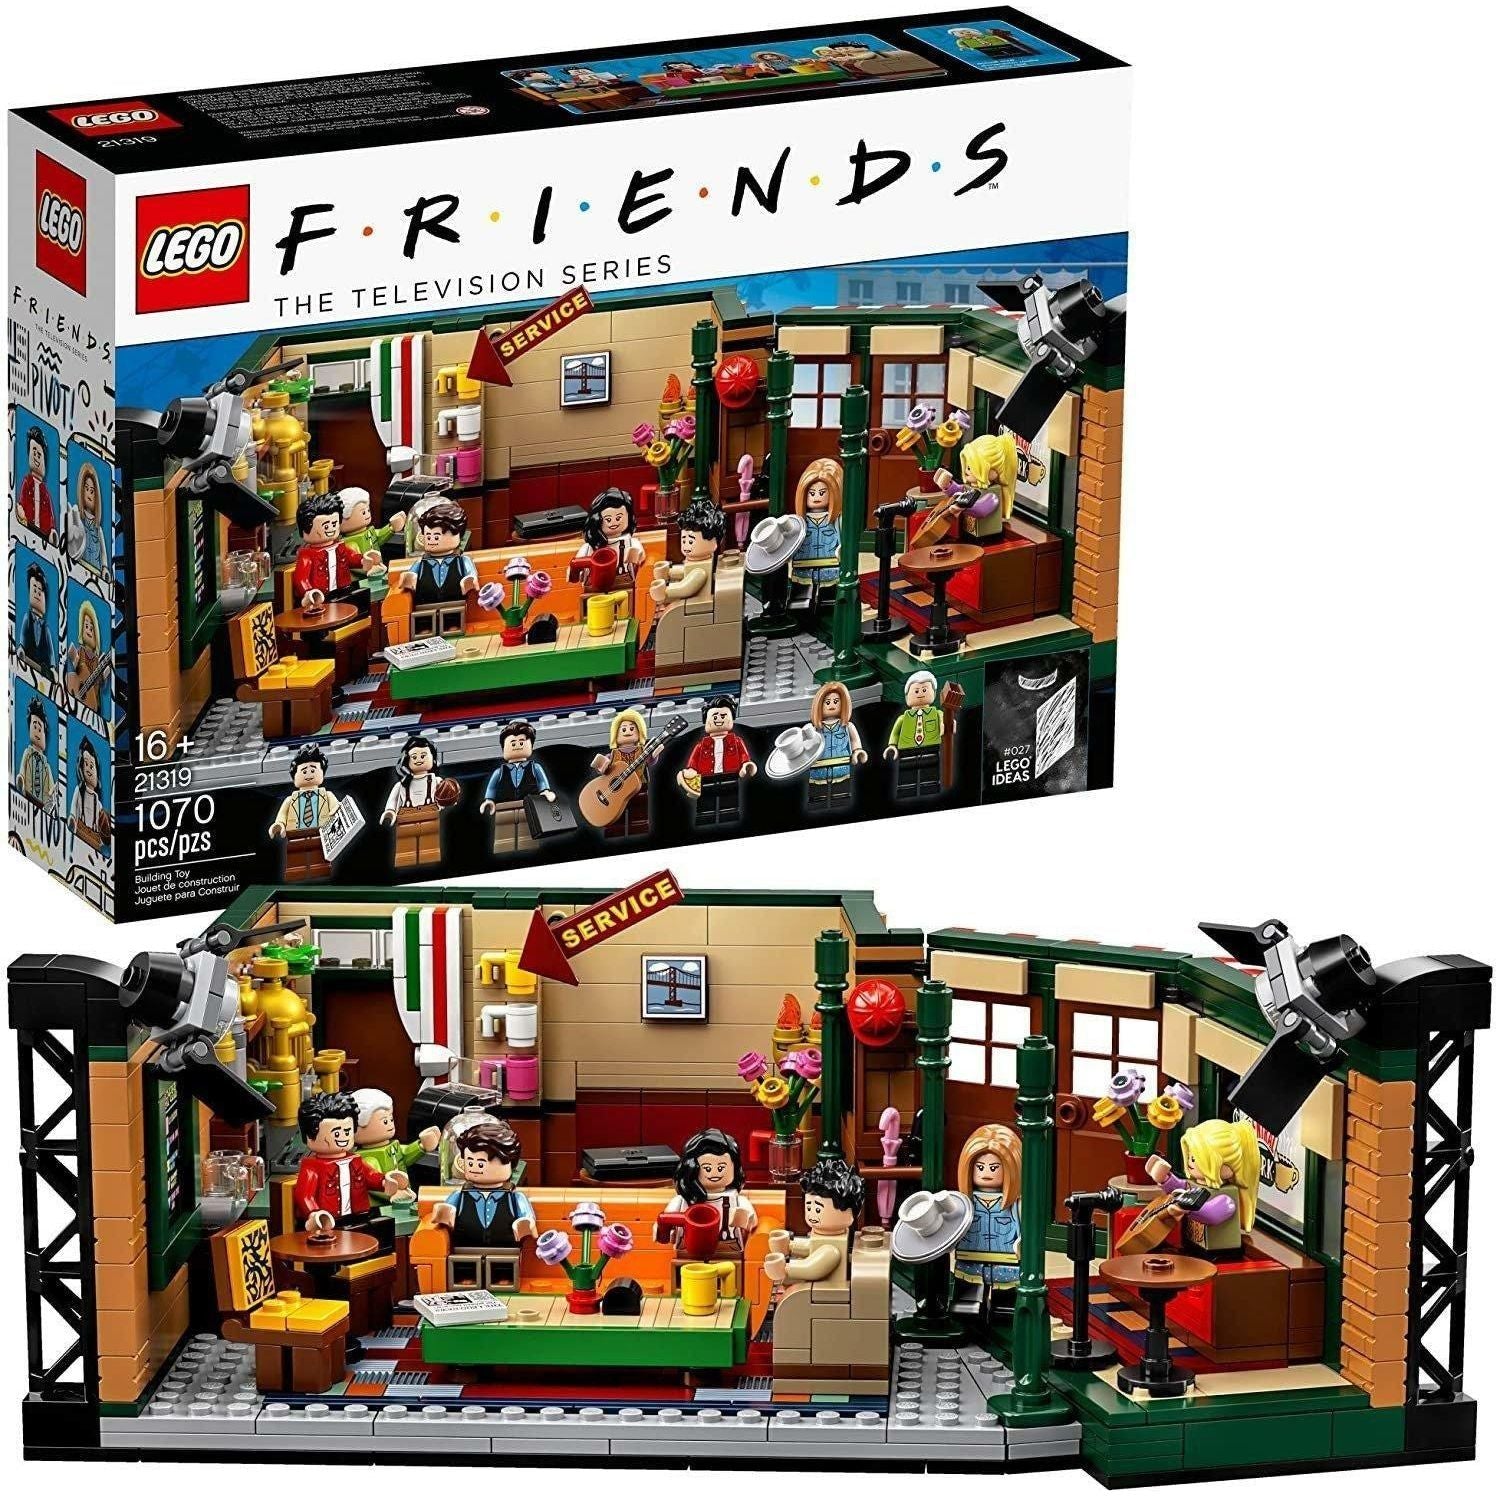 LEGO Ideas 21319 Friends TV Series Central Perk Building Kit (1,070 Pieces) - BumbleToys - 8-13 Years, Boys, Friends, Ideas, LEGO, OXE, Pre-Order